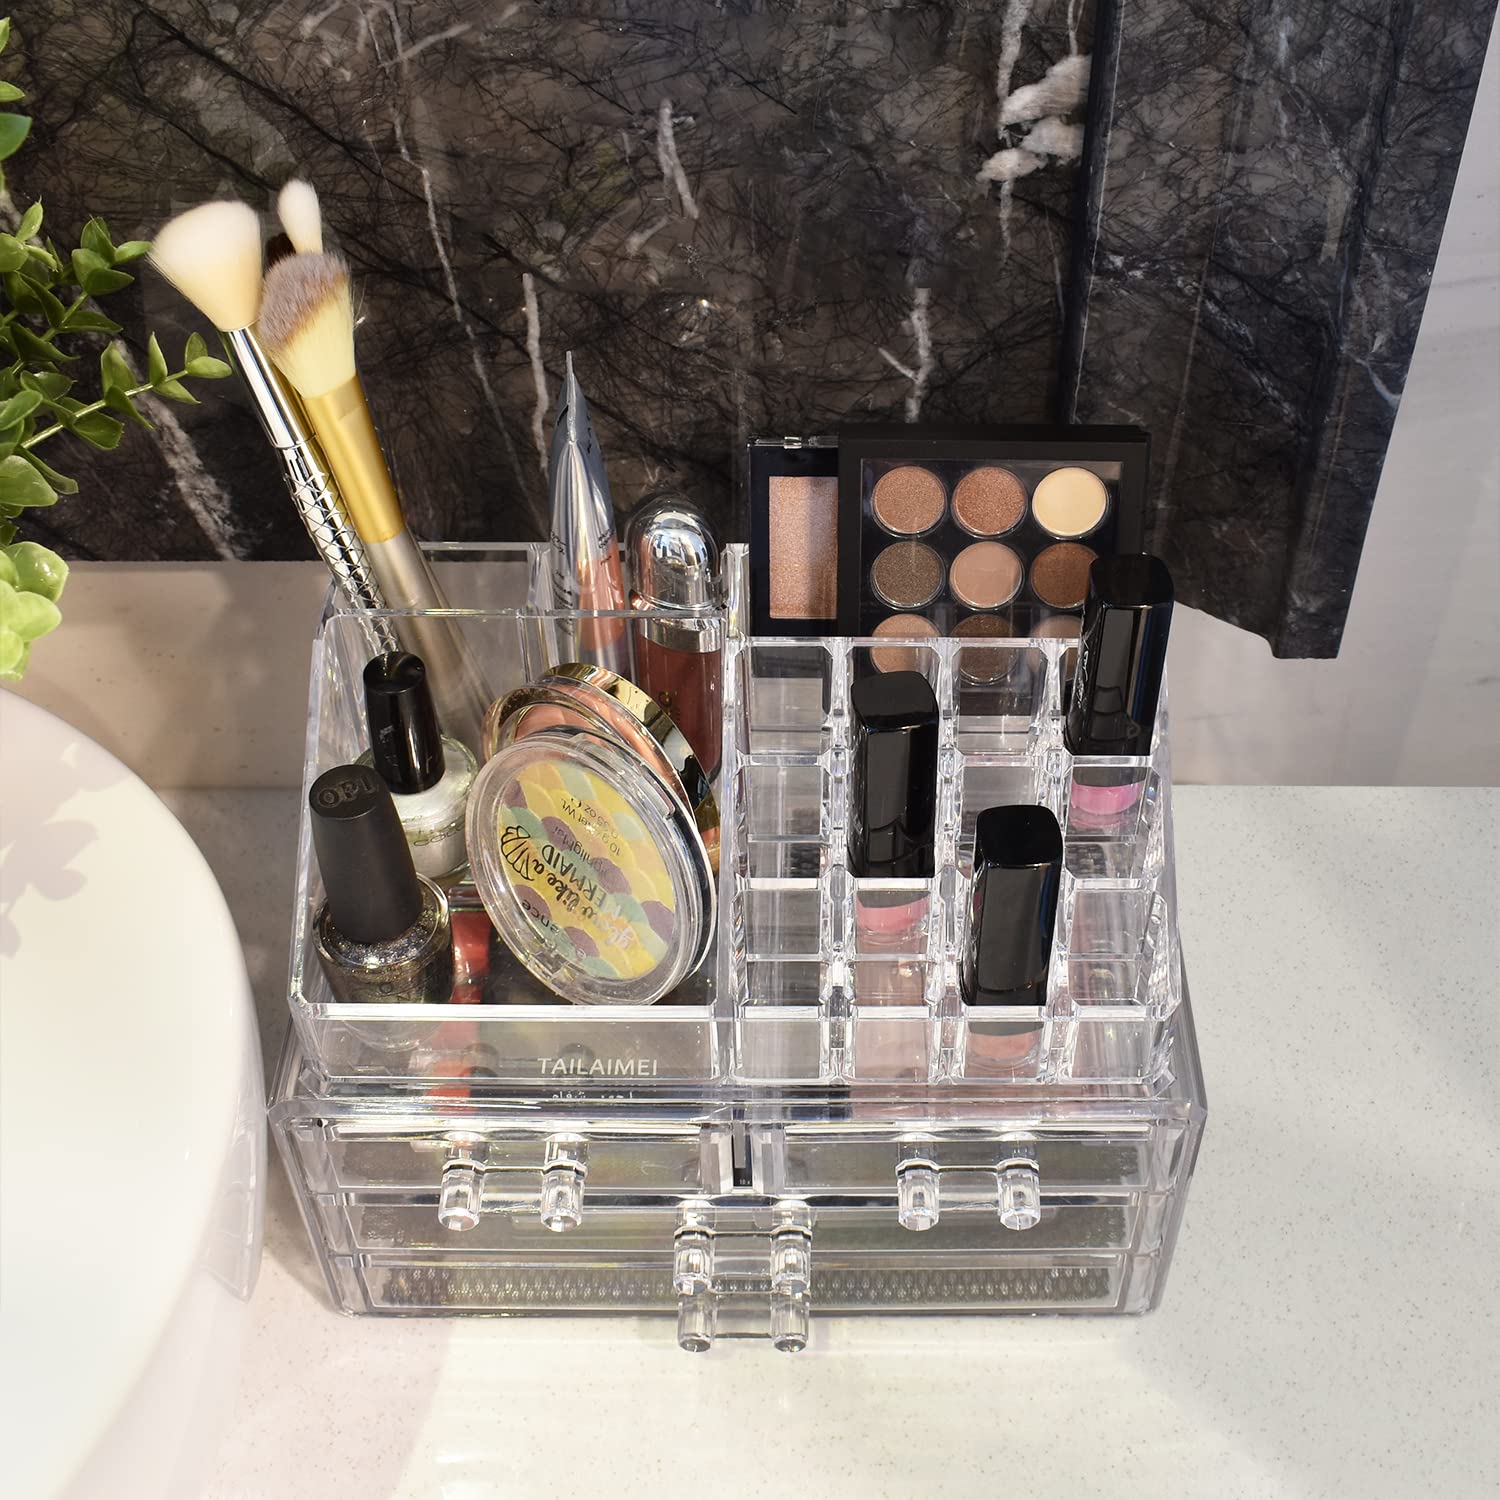 Ikee Design Clear Makeup Organizer for Vanity, Bathroom Counter or Dresser - Easily Accessible with Clear Design. Perfectly Organize Your Beauty Essentials. Adds an Elegant Touch to Your Space.